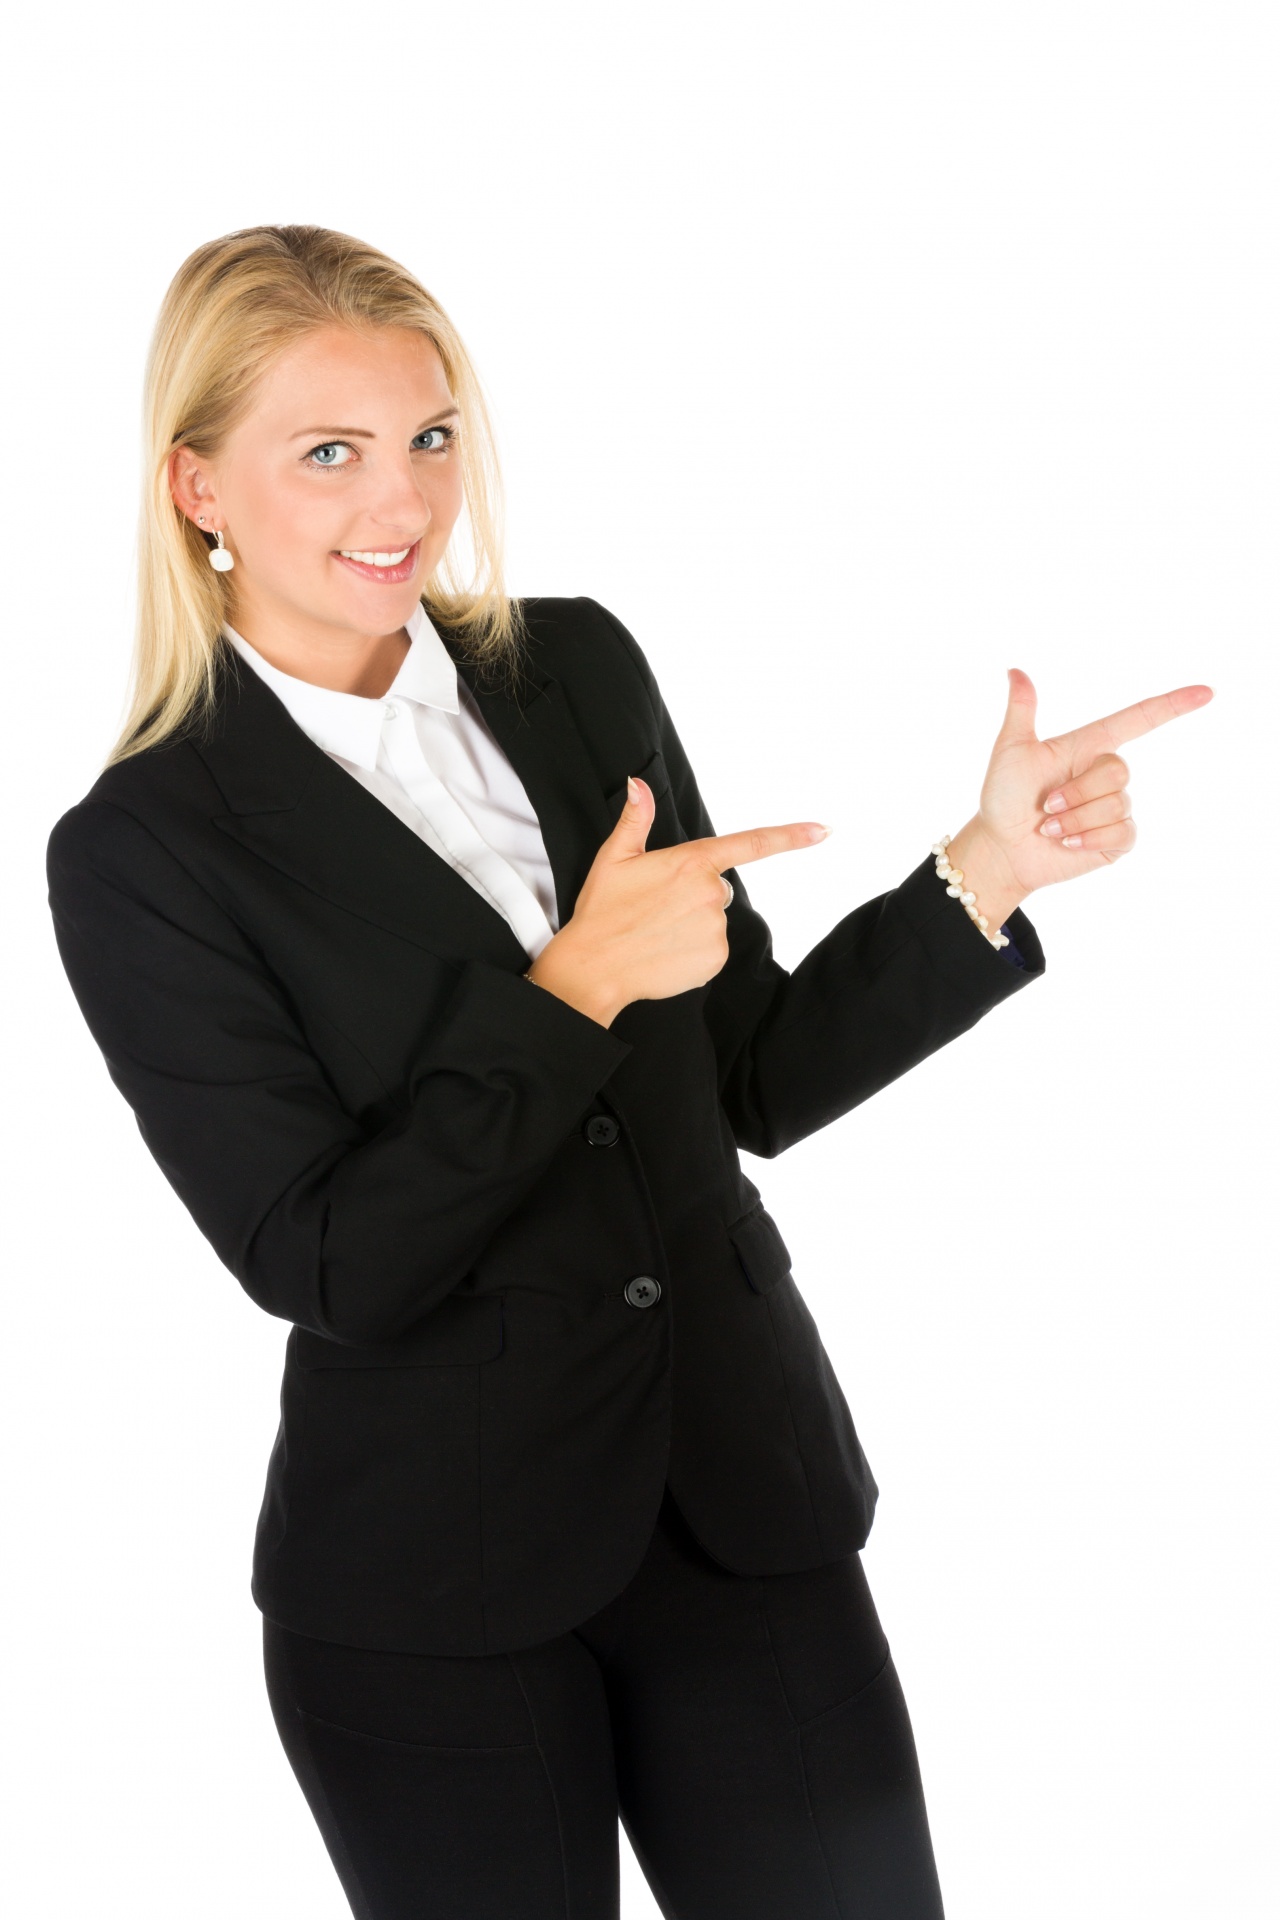 http://www.publicdomainpictures.net/pictures/190000/velka/business-woman-pointing-1470490477O2v.jpg